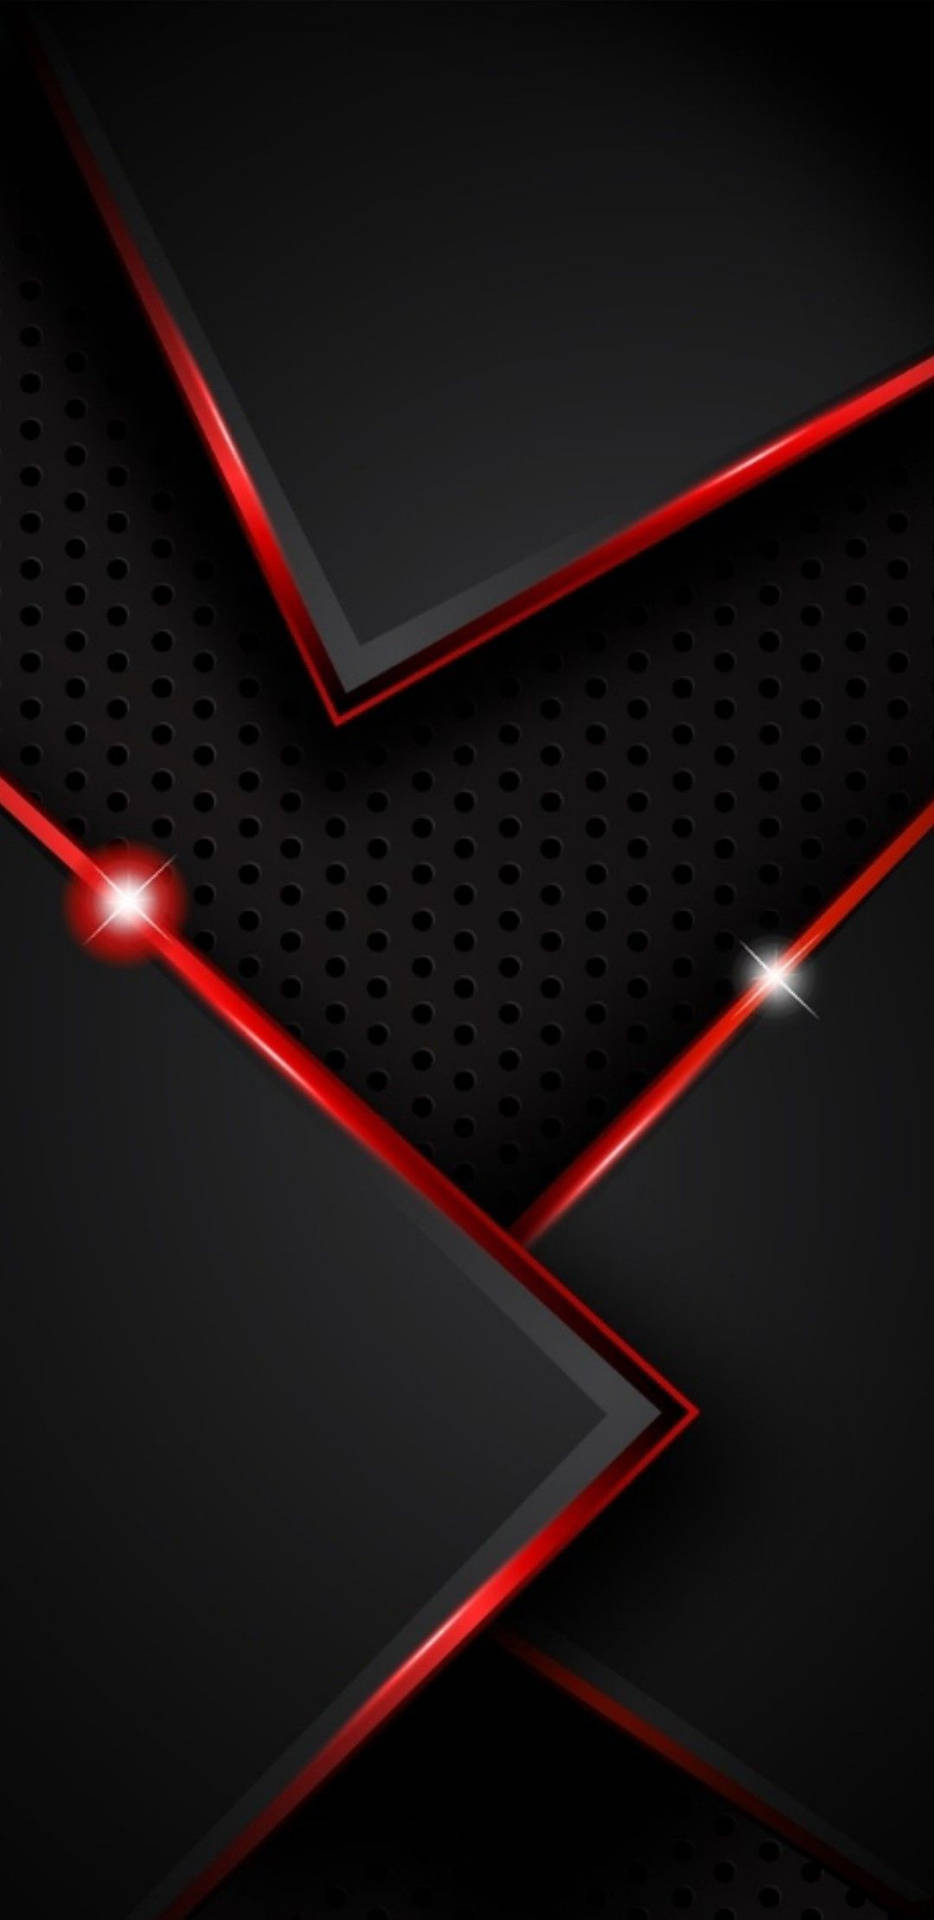 A Vivid Red And Black Display Background